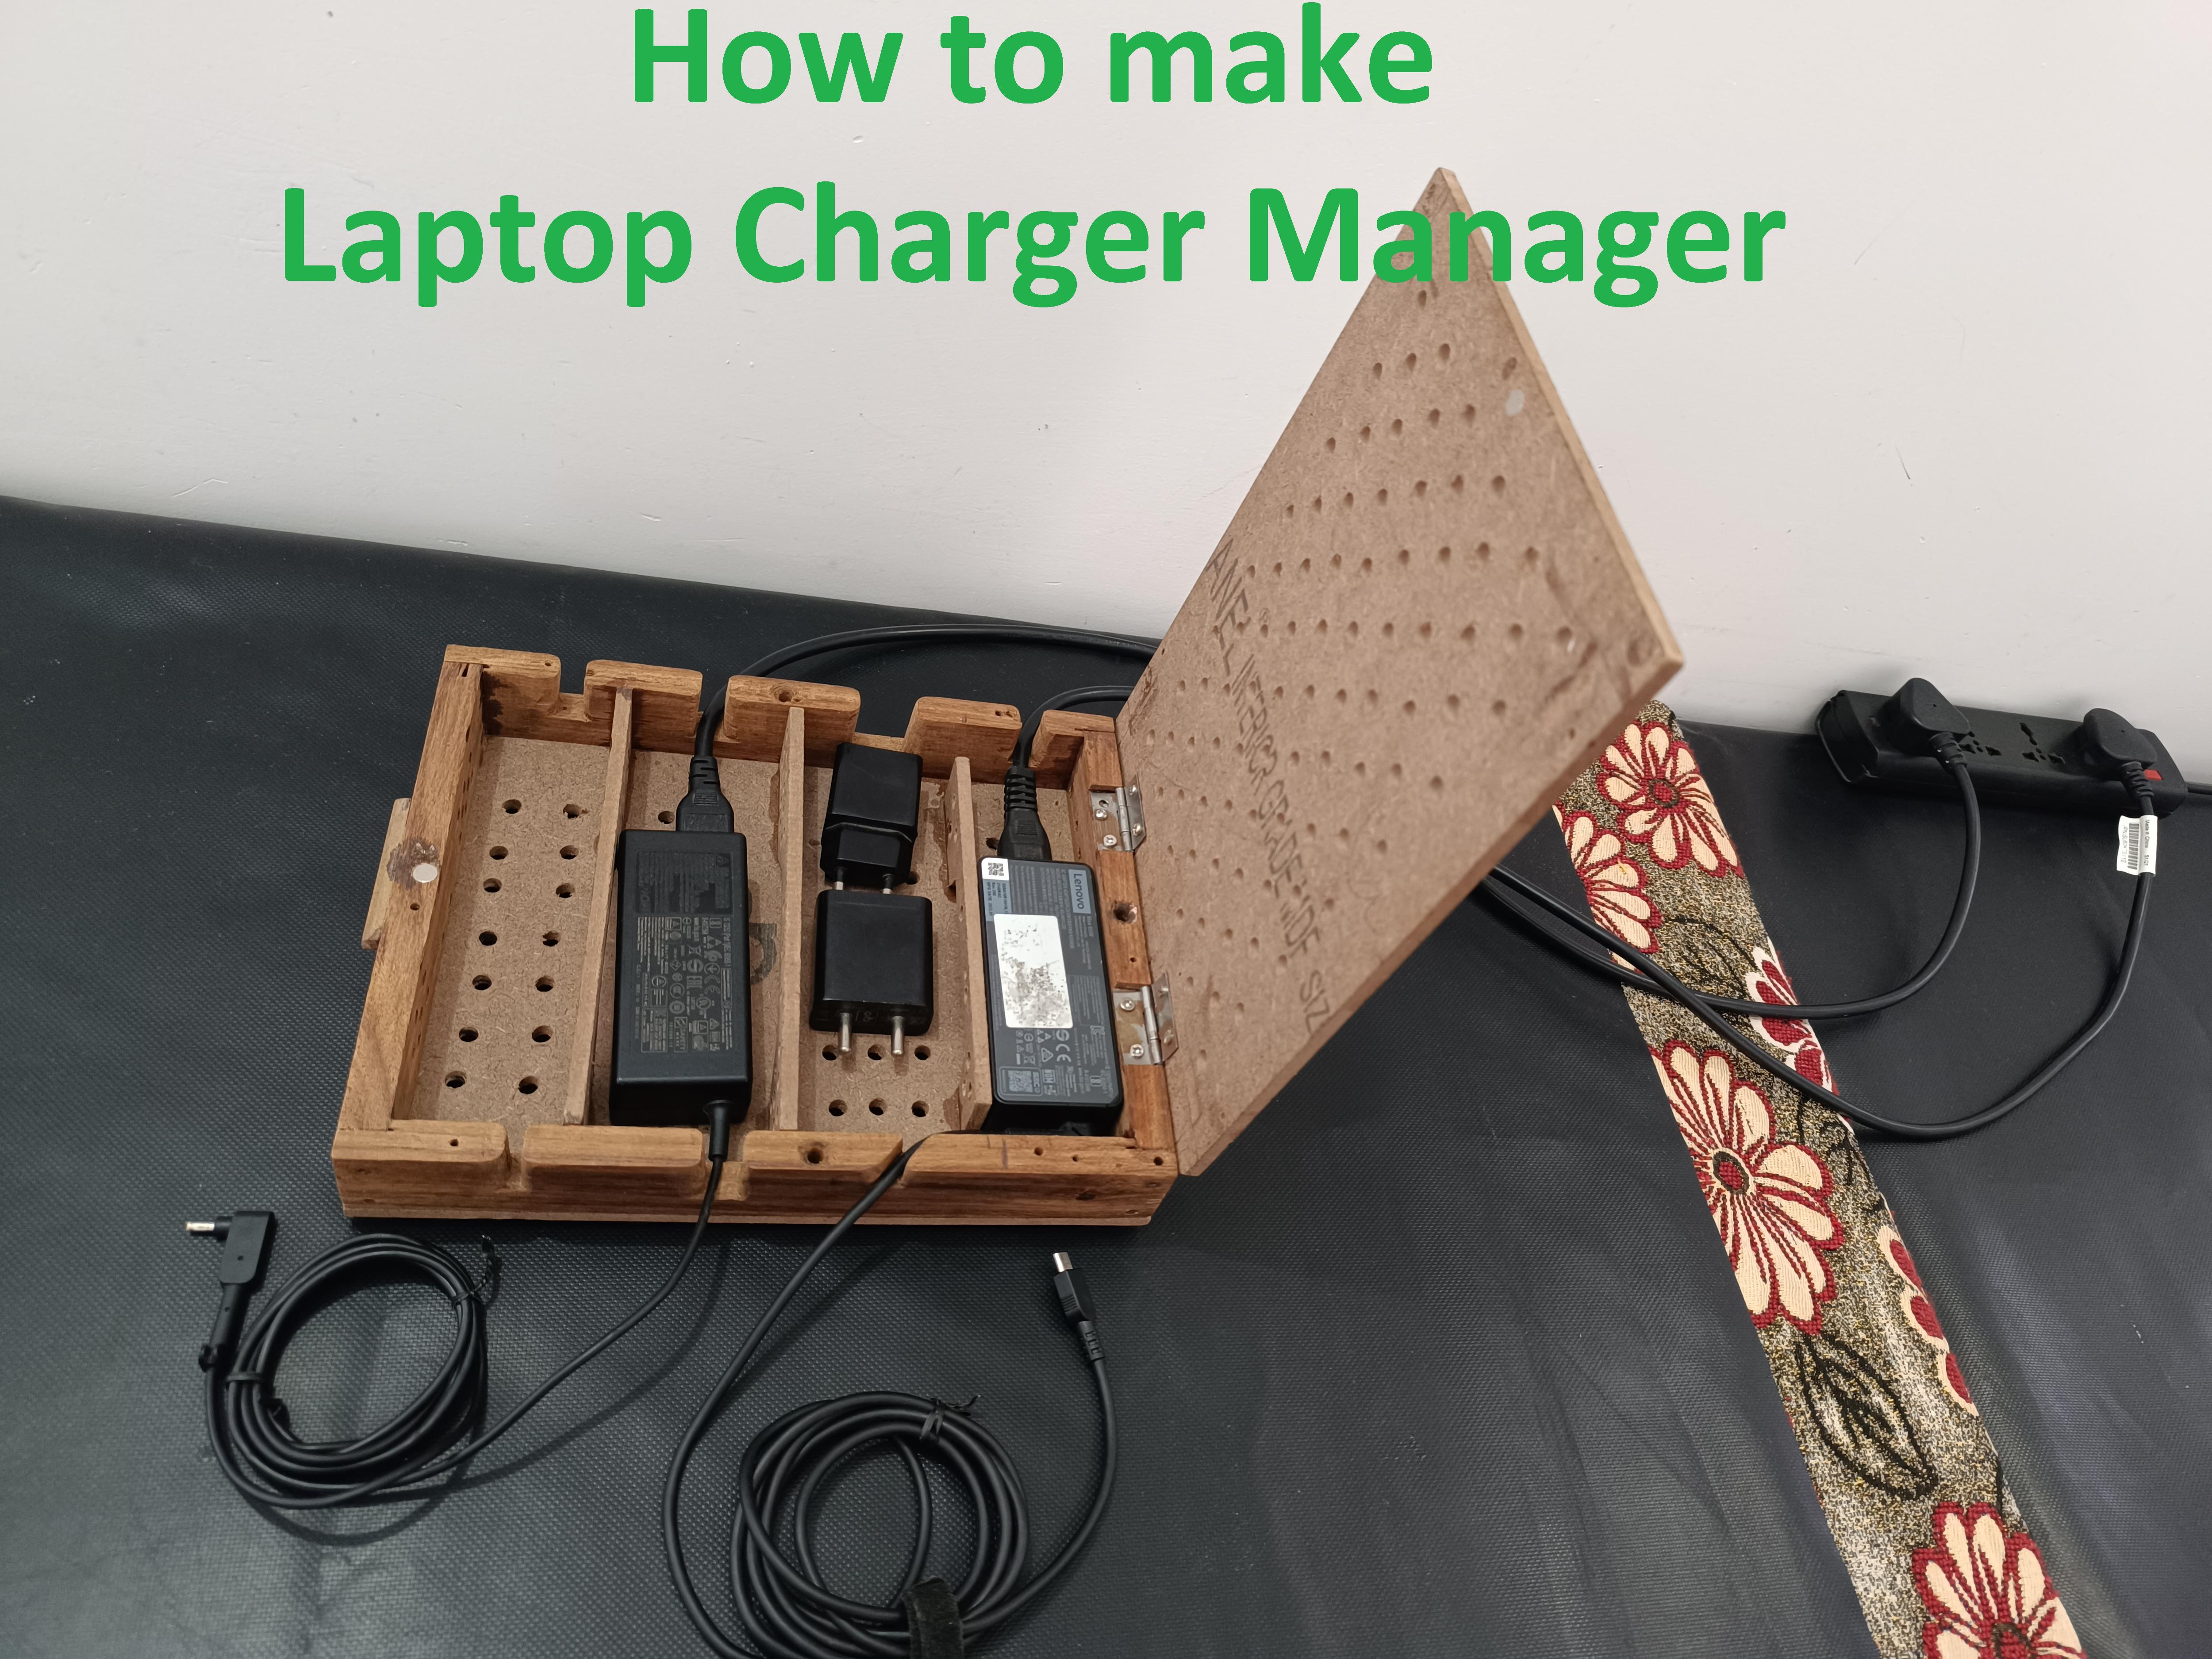 Laptop Charger Manager